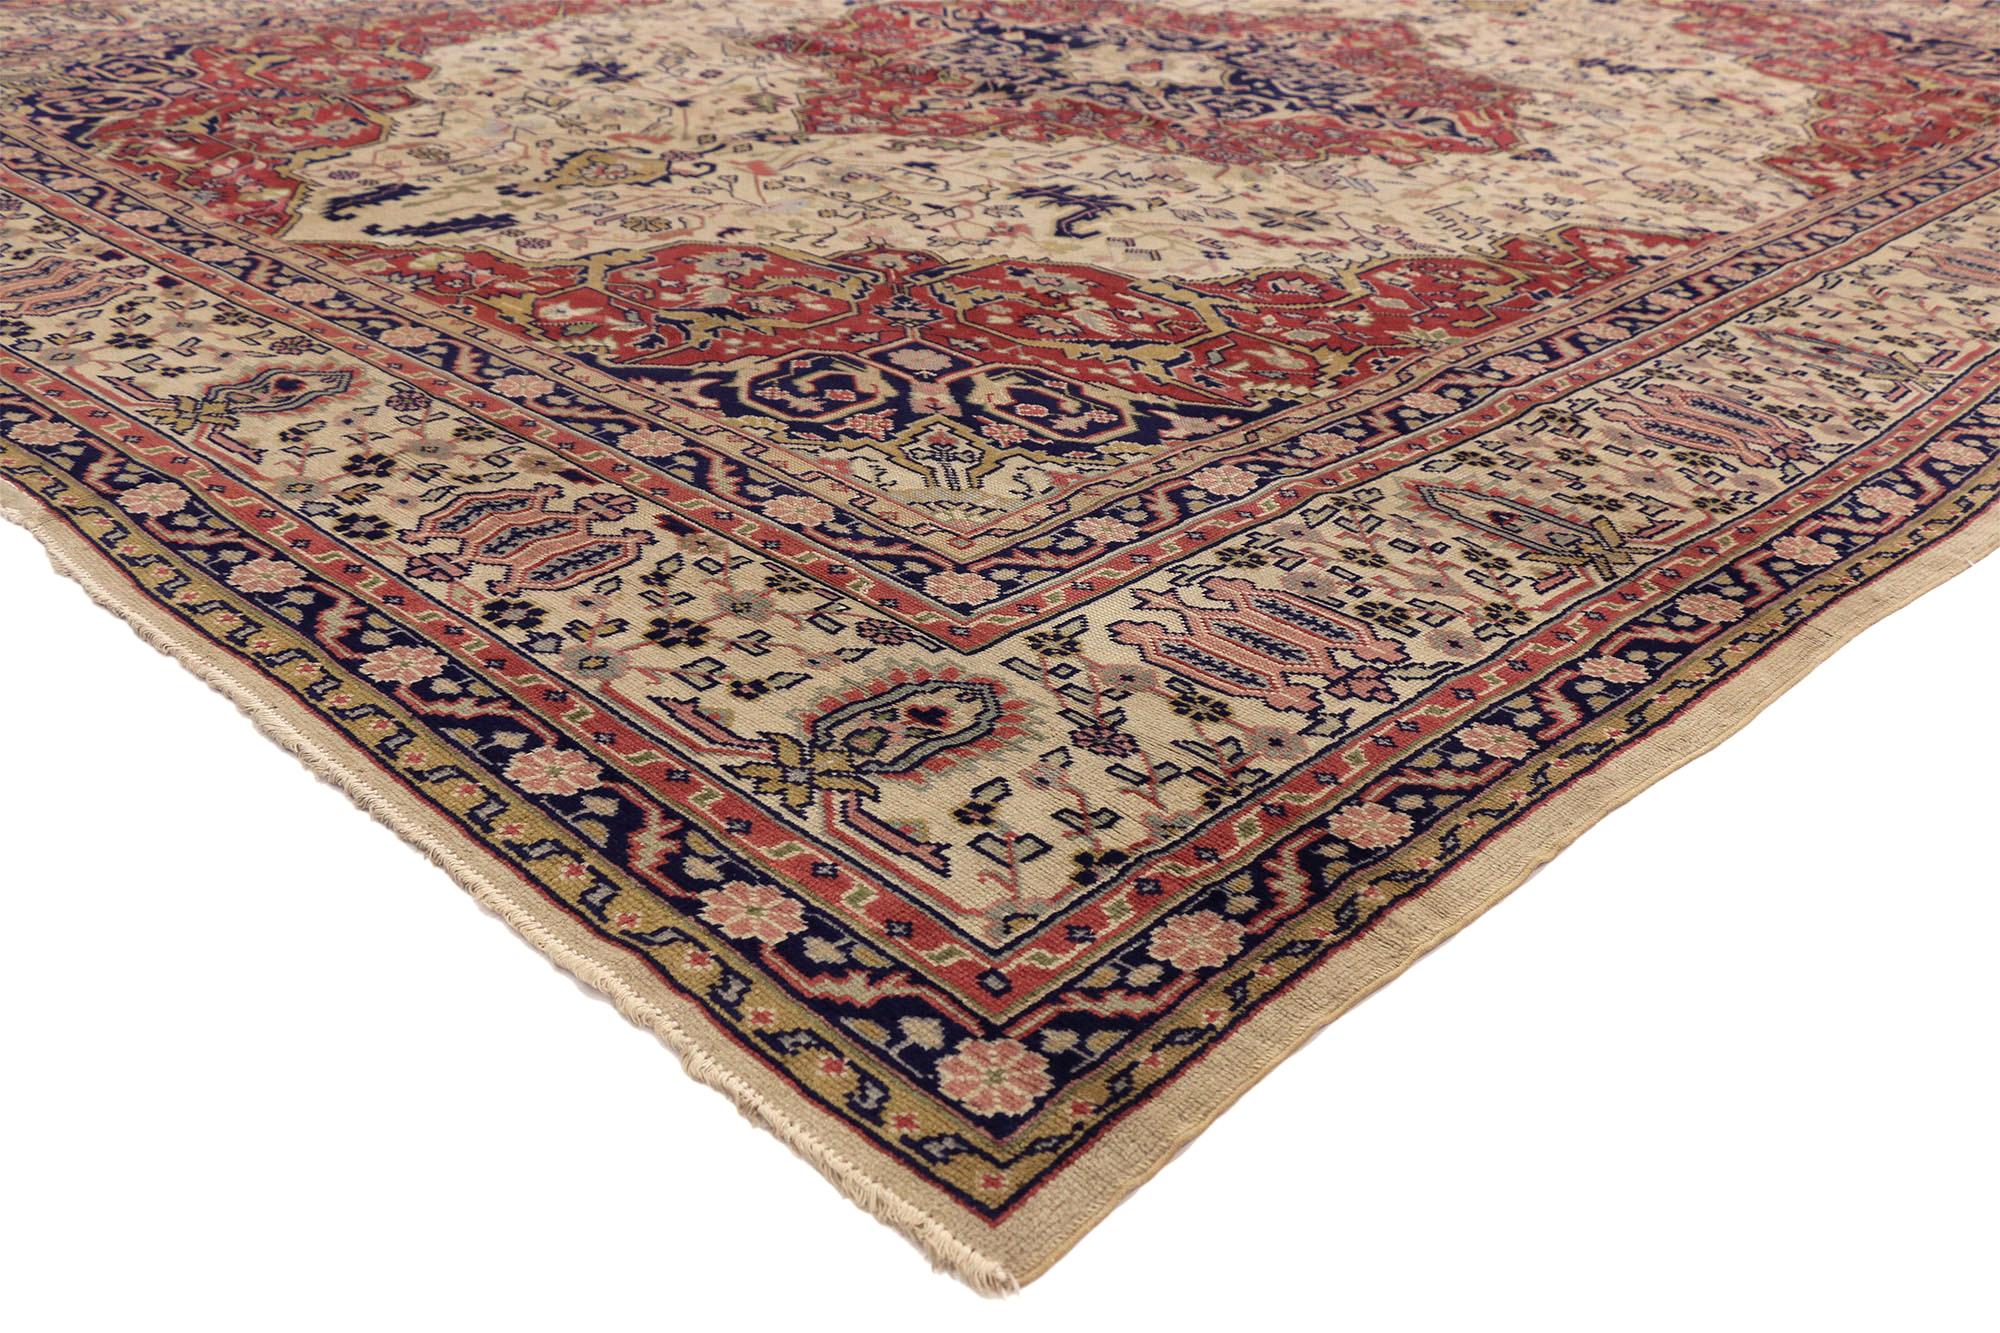 71437 Antique Indian Agra Rug, 09'08 x 12'08. Indian Agra rugs, originating from Agra, Uttar Pradesh, India, are renowned for their intricate floral motifs, geometric patterns, and elaborate borders influenced by Persian and Mughal traditions.